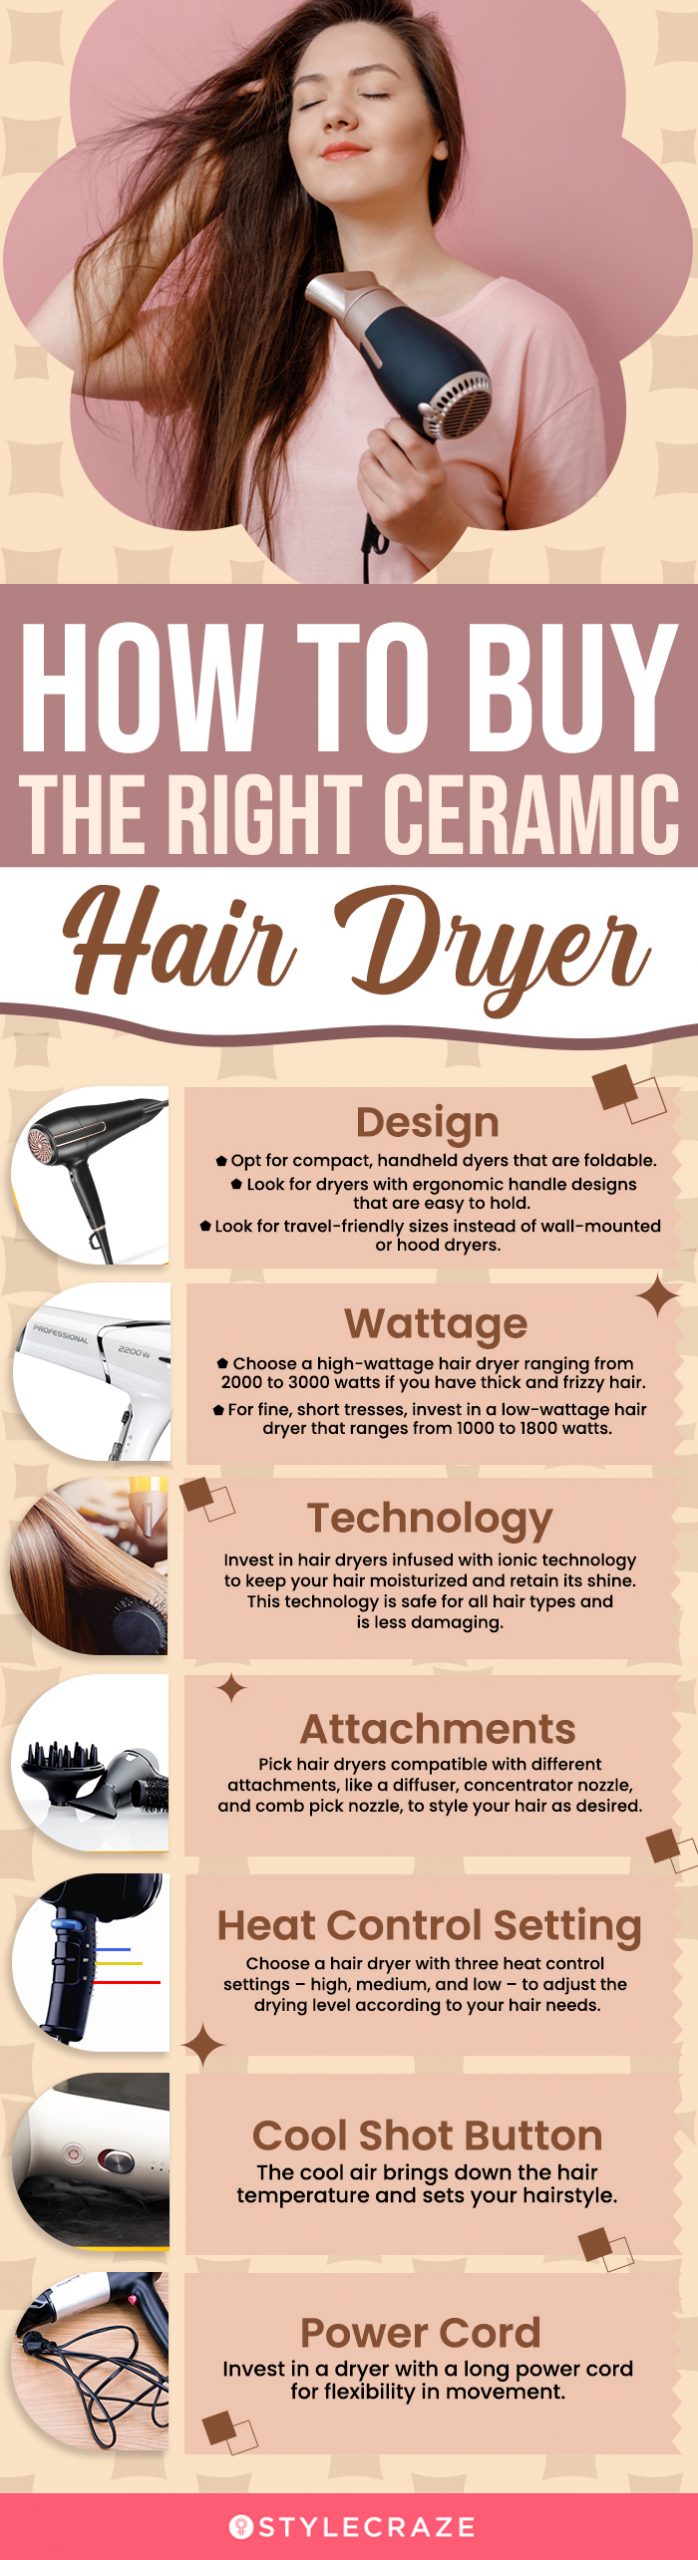 How To Buy The Right Ceramic Hair Dryer [infographic]